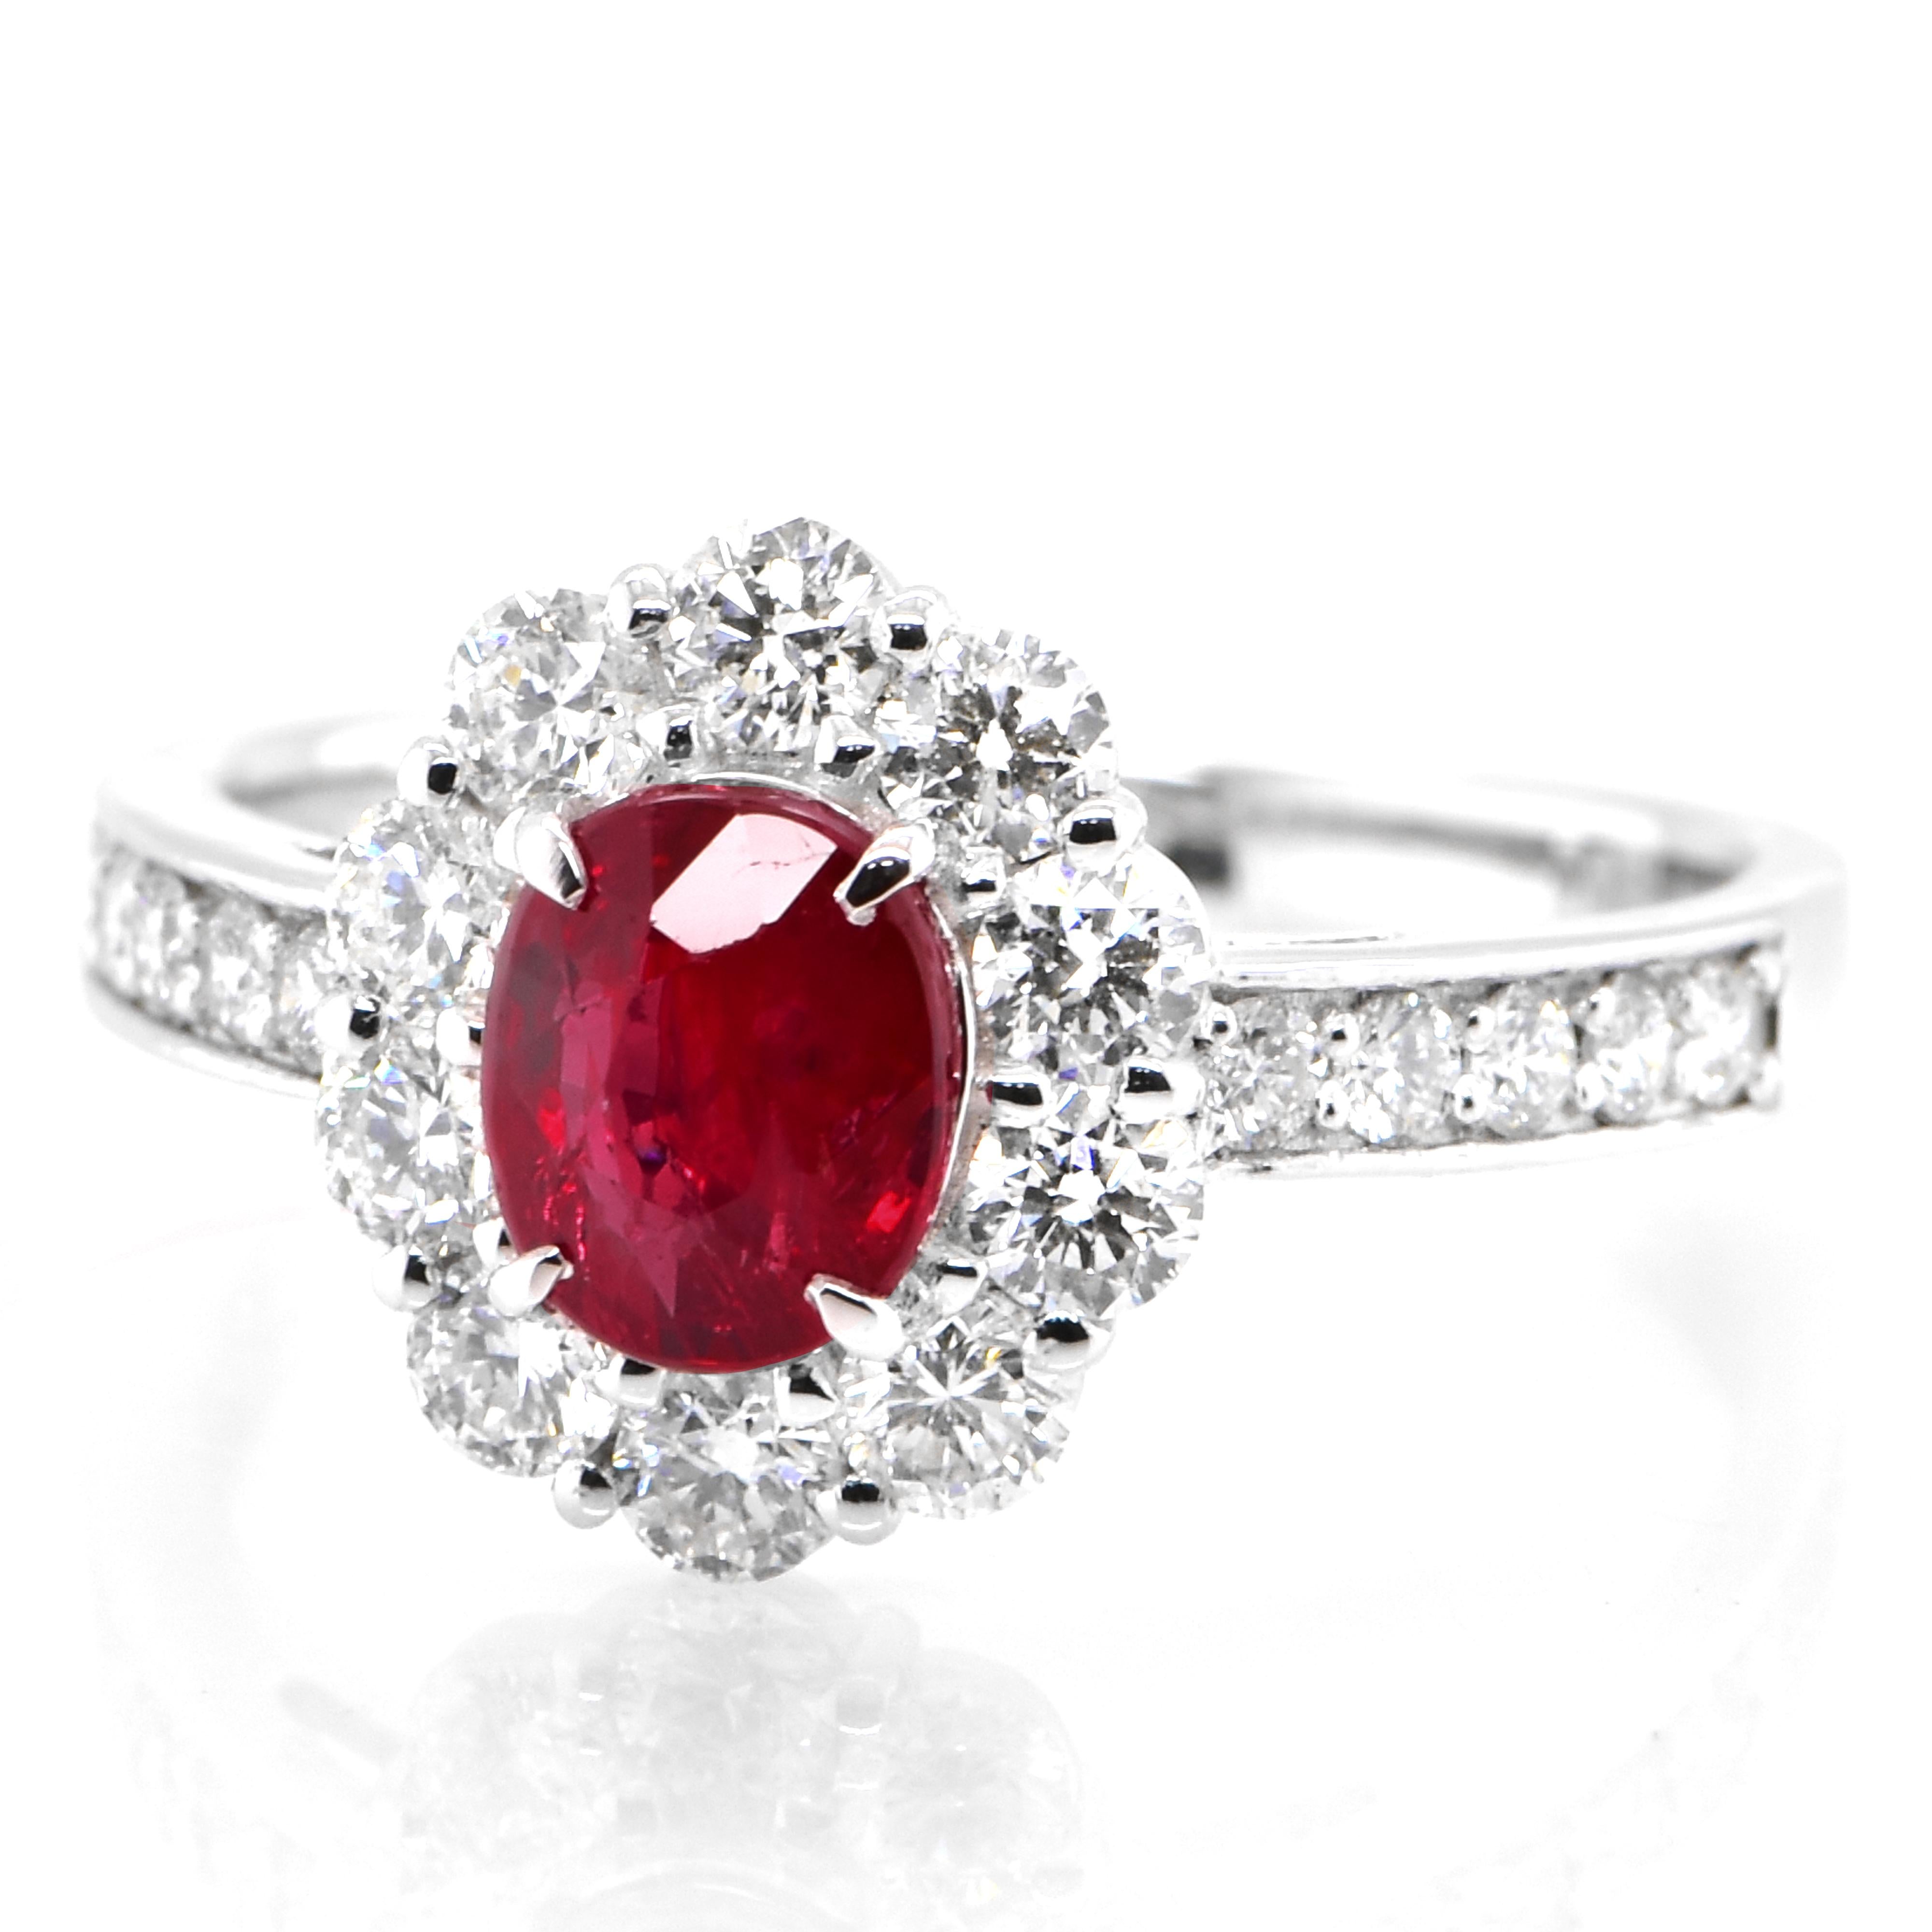 A beautiful Ring set in Platinum featuring a GIA Certified 0.99 Carat Natural Untreated (Unheated) Ruby and 0.77 Carat Diamonds. Rubies are referred to as 